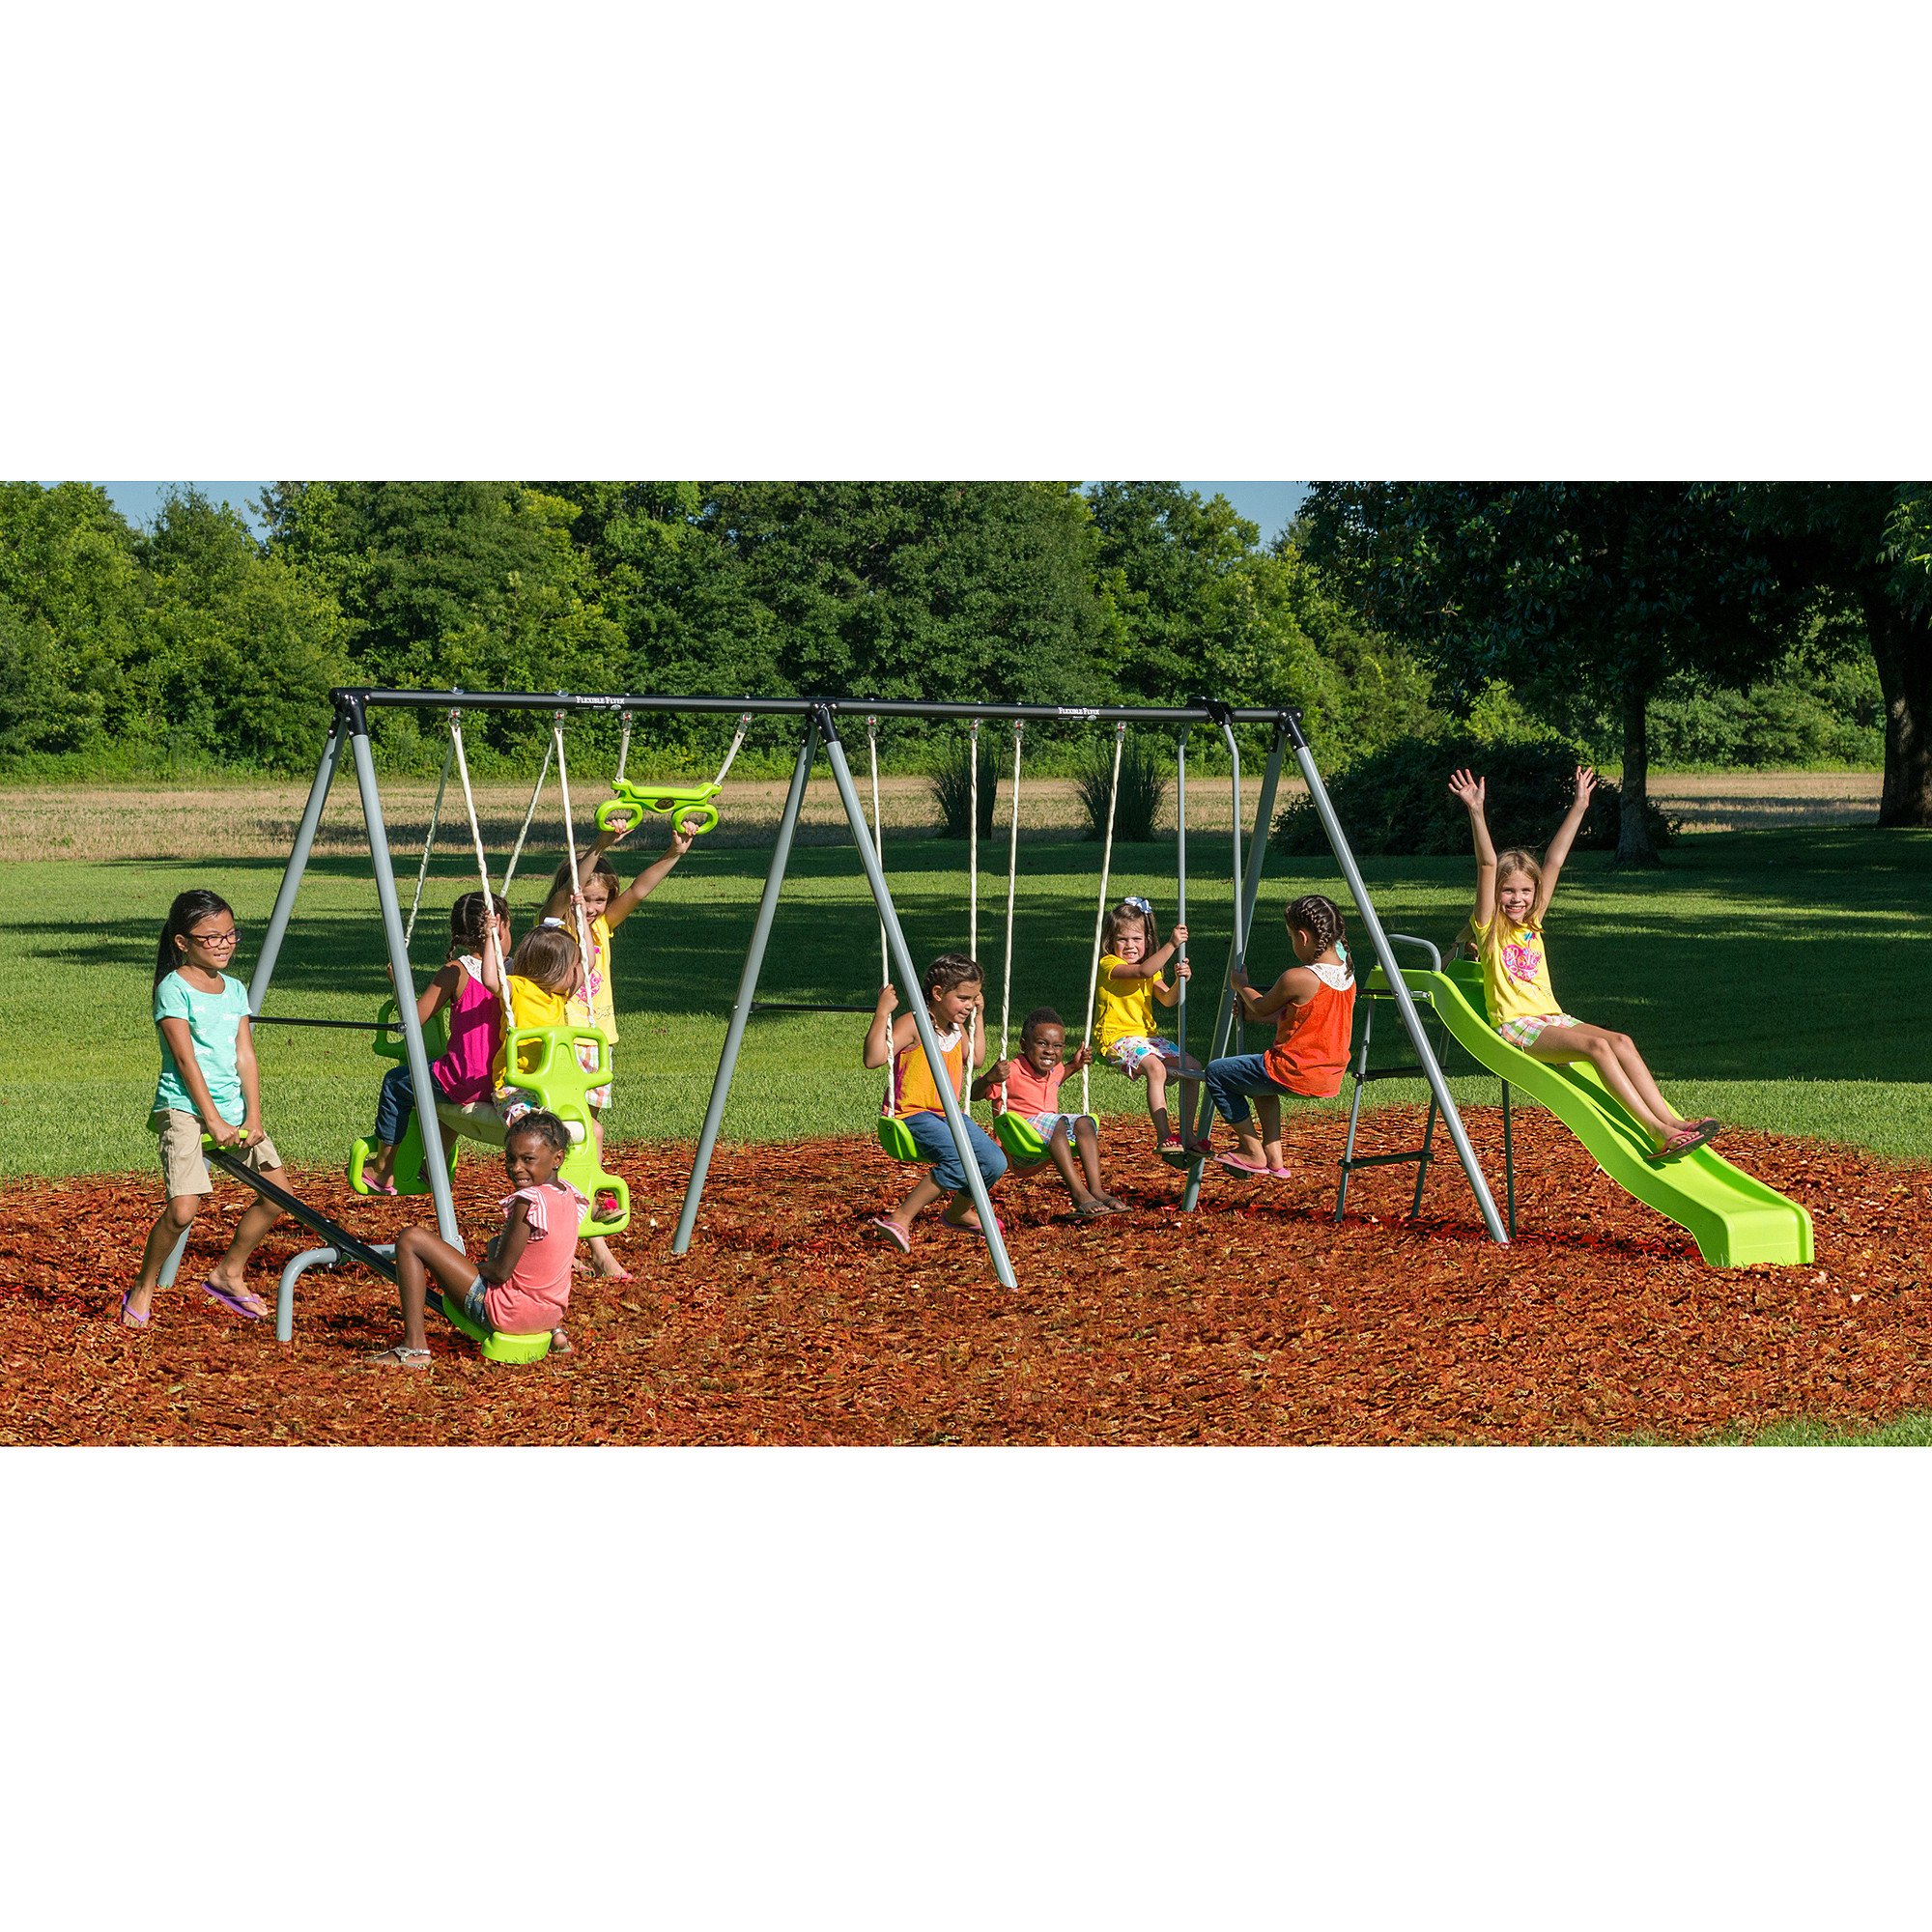 21 Amazing Walmart Swing Sets for Kids Home, Family, Style and Art Ideas